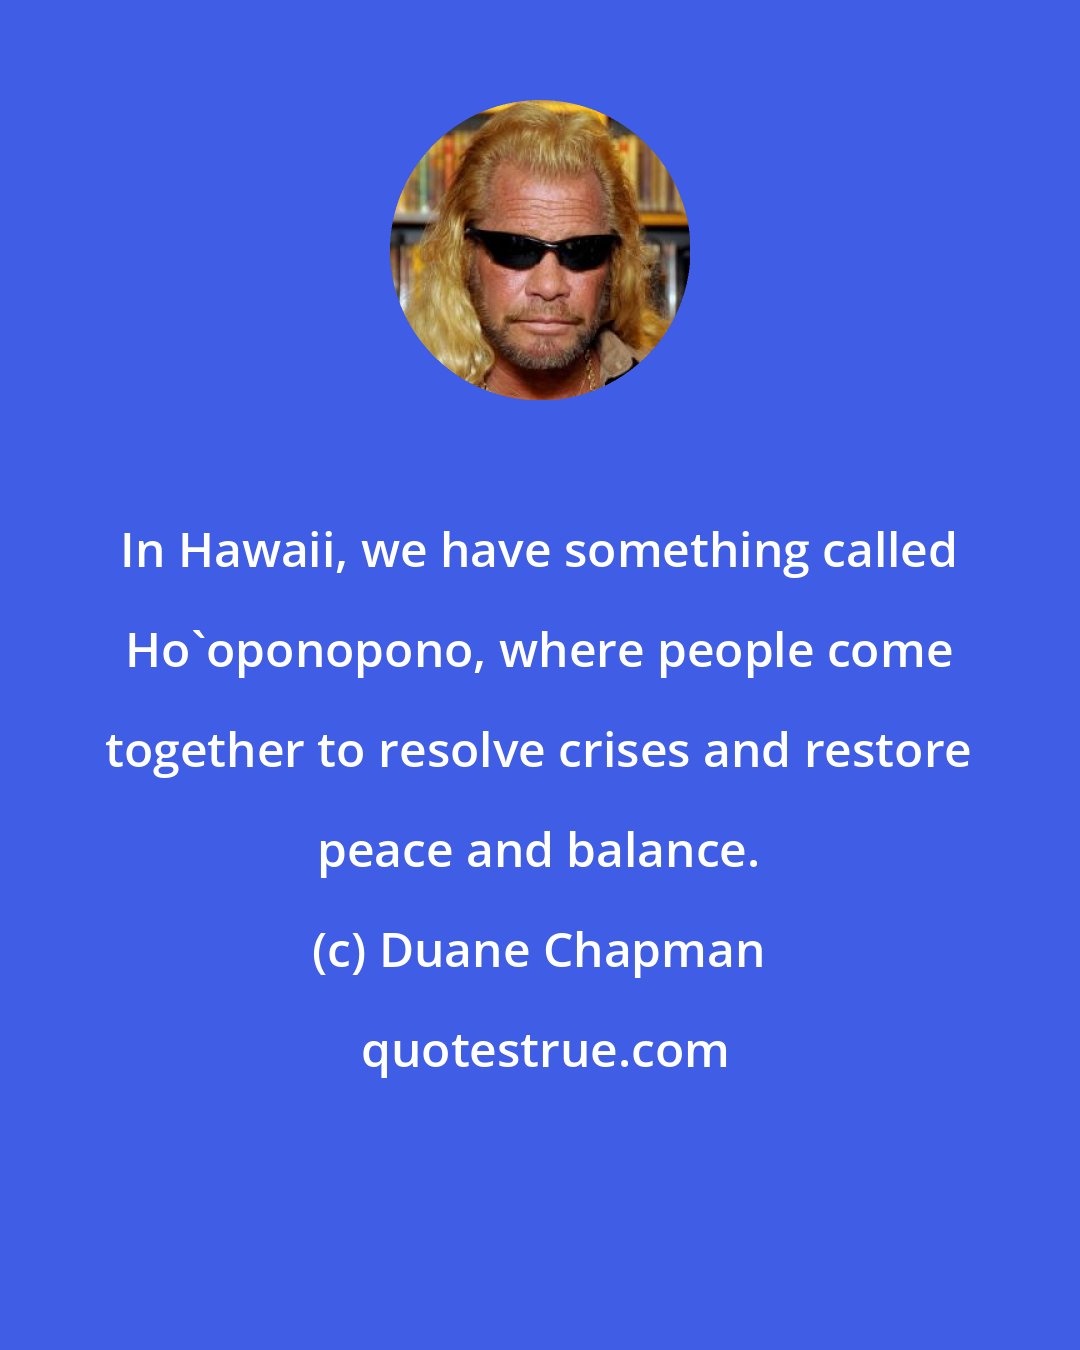 Duane Chapman: In Hawaii, we have something called Ho'oponopono, where people come together to resolve crises and restore peace and balance.